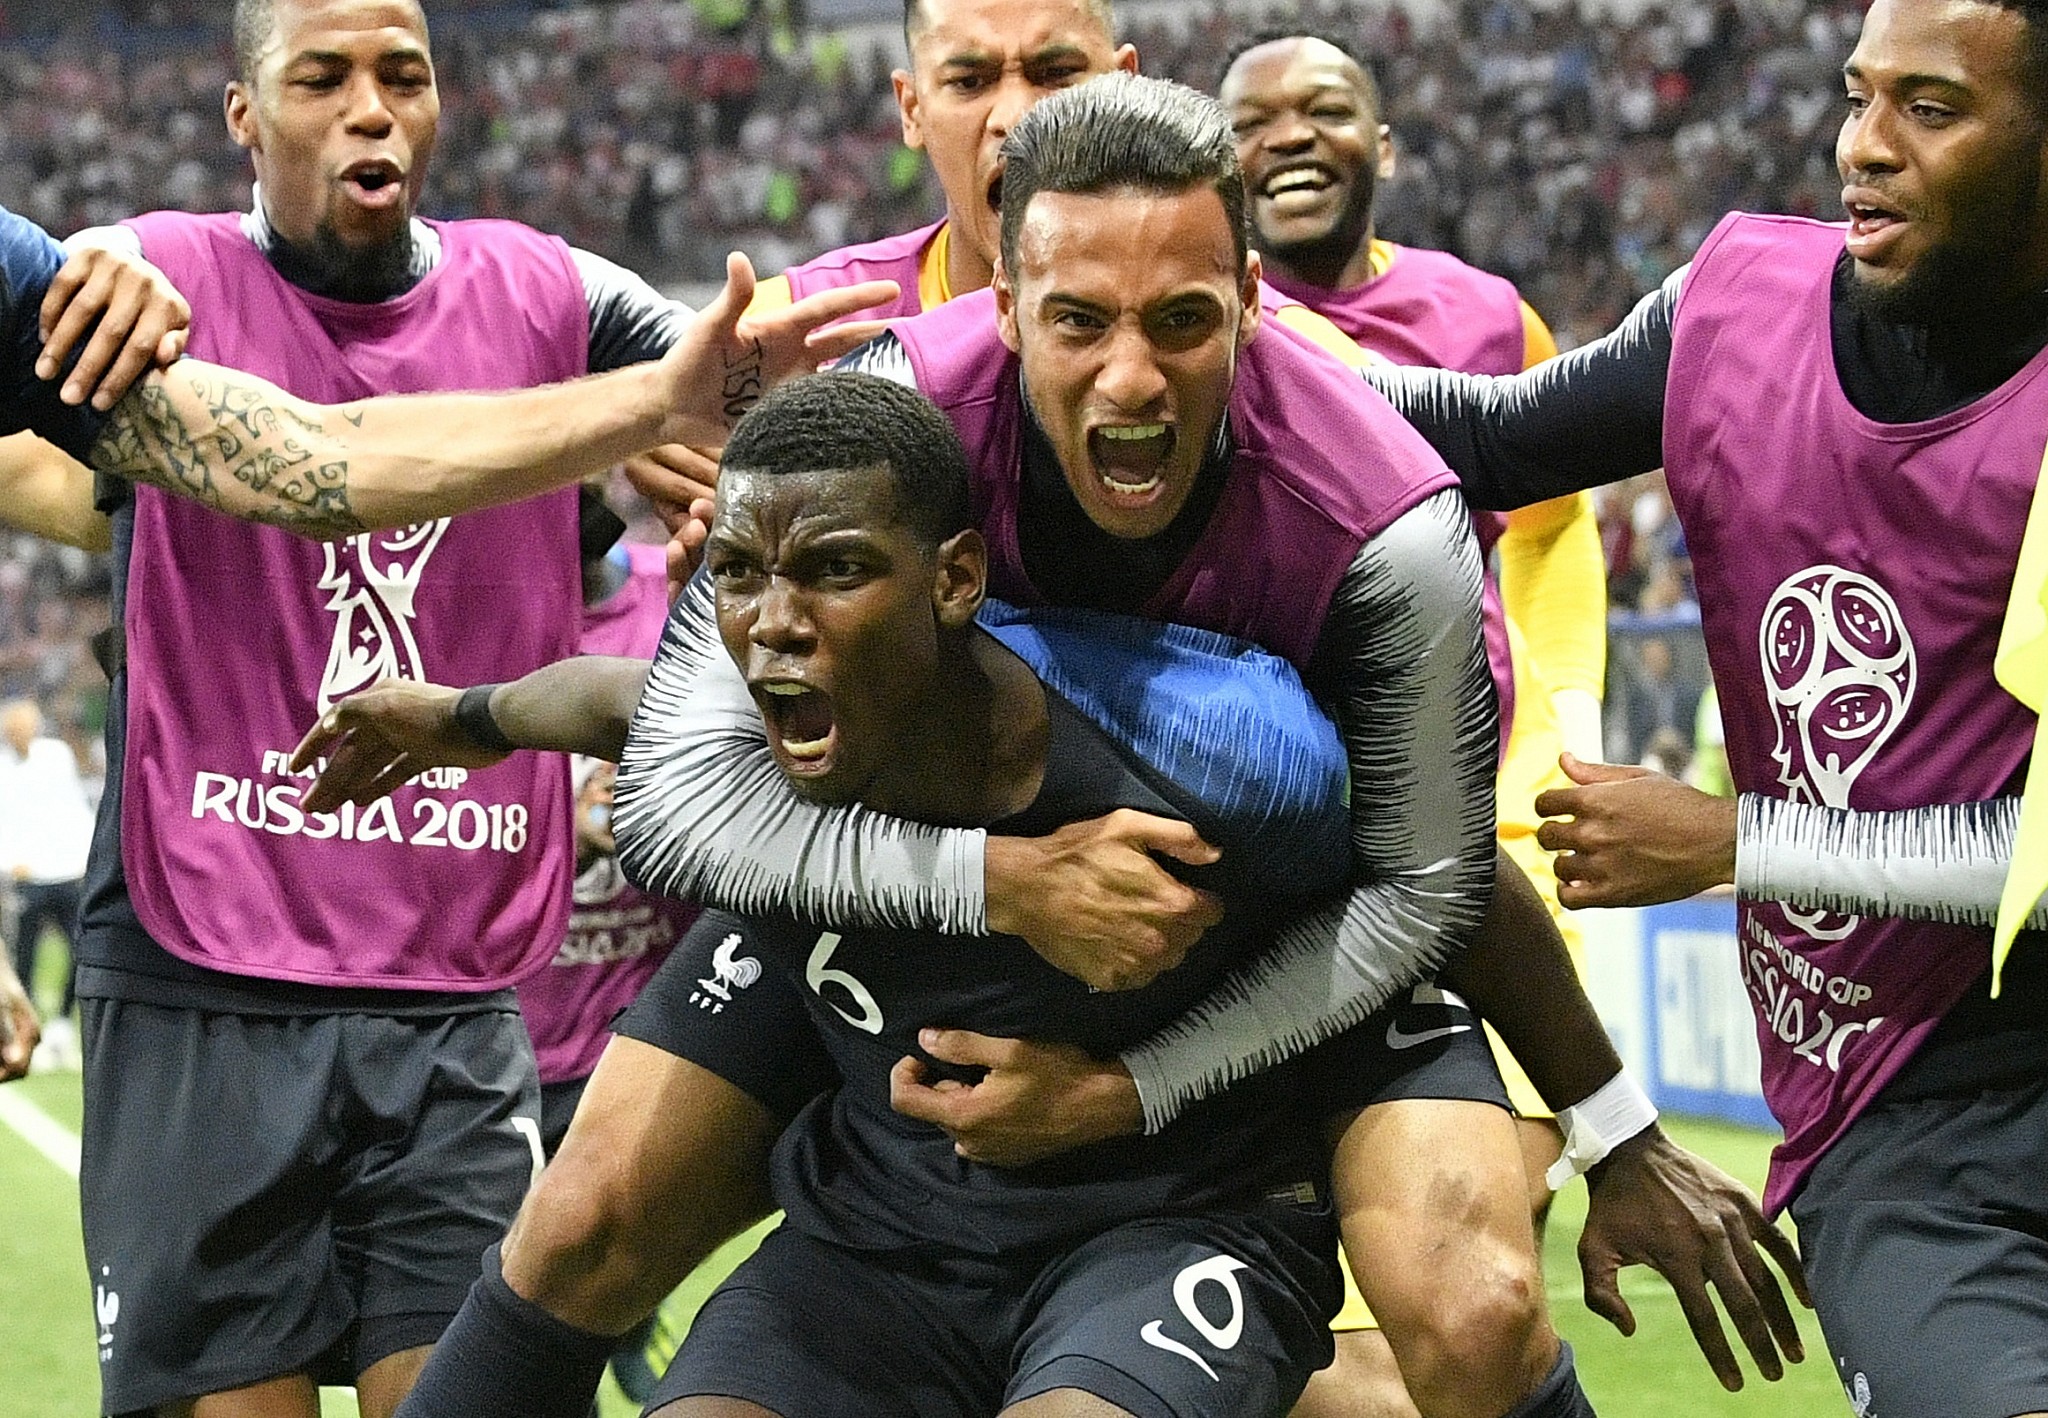 2018 FIFA World Cup Final Recap: France win second World Cup title with 4-2  win over Croatia